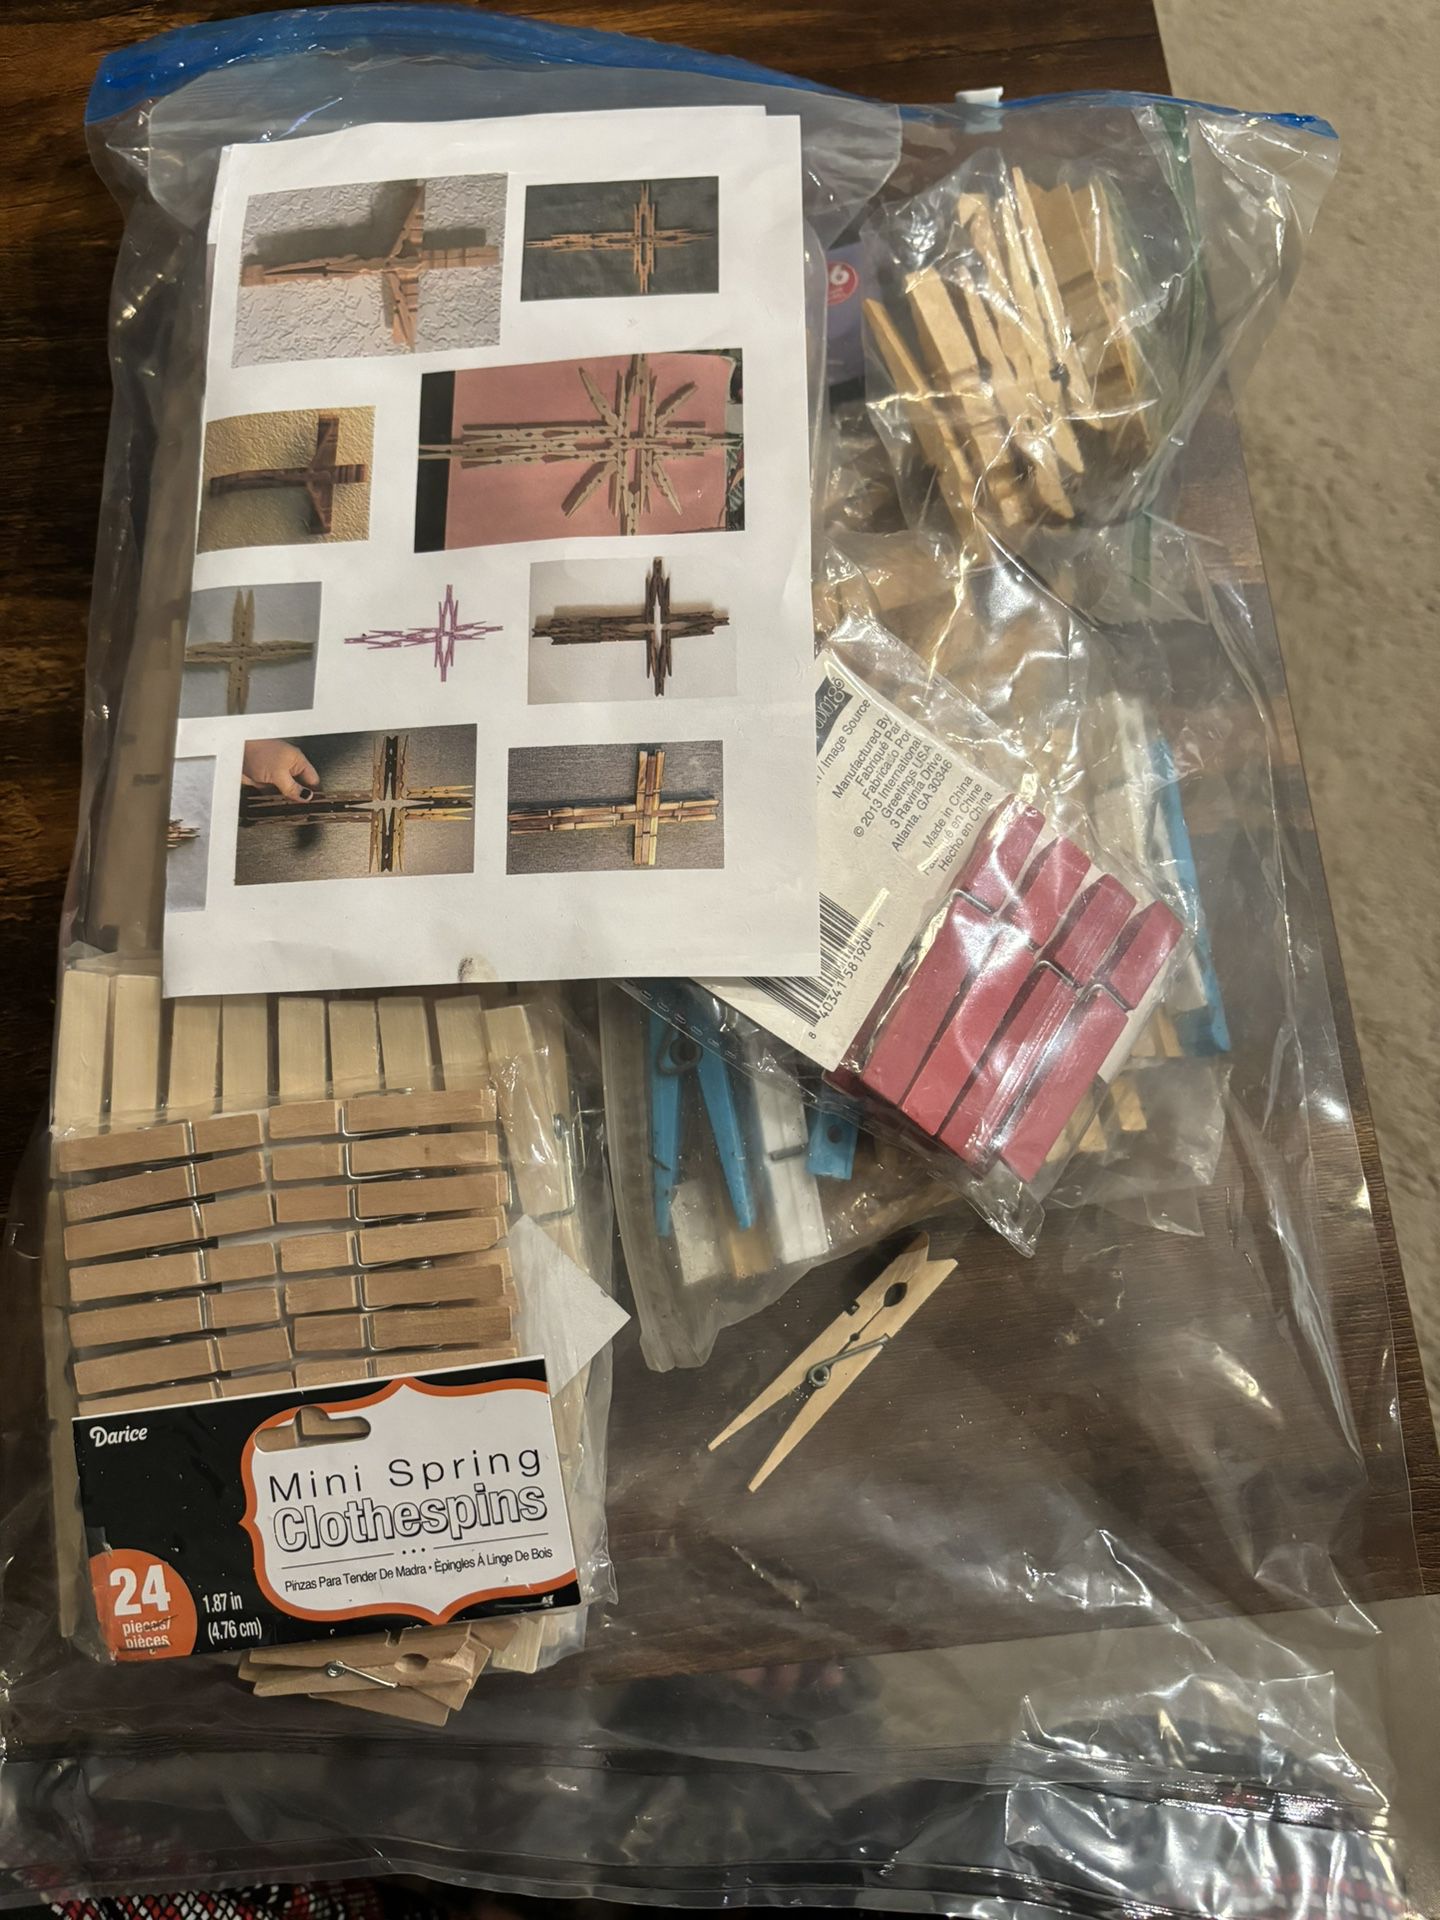 Giant Bag of Clothespins